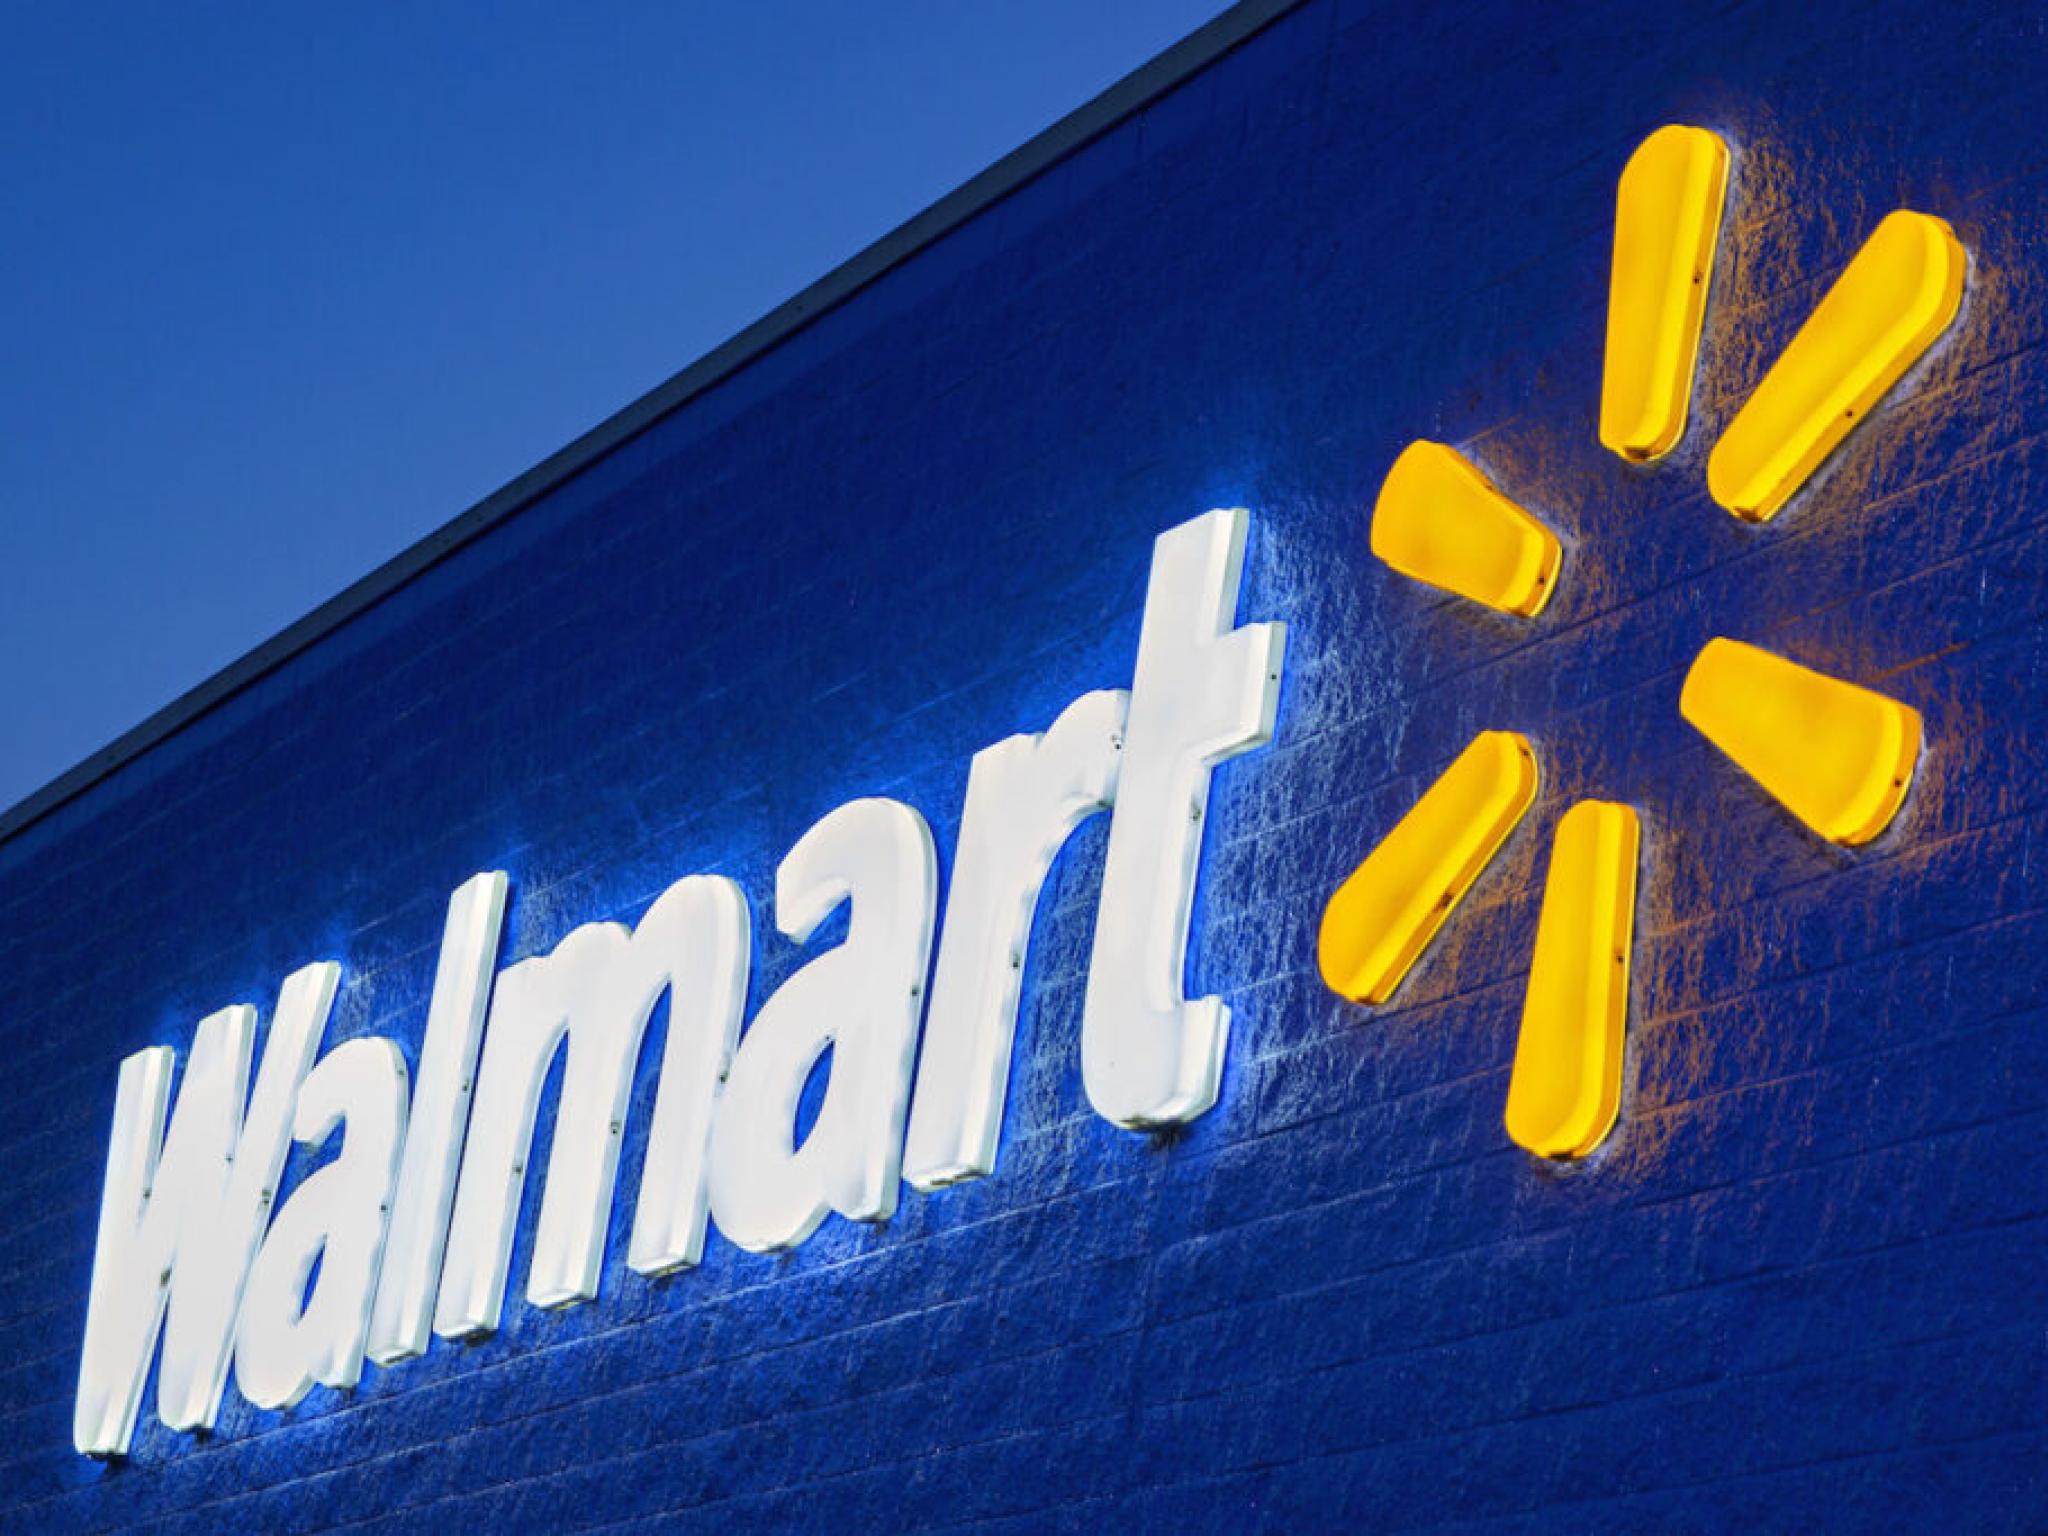  walmart-vertex-pharmaceuticals-and-more-on-cnbcs-final-trades 